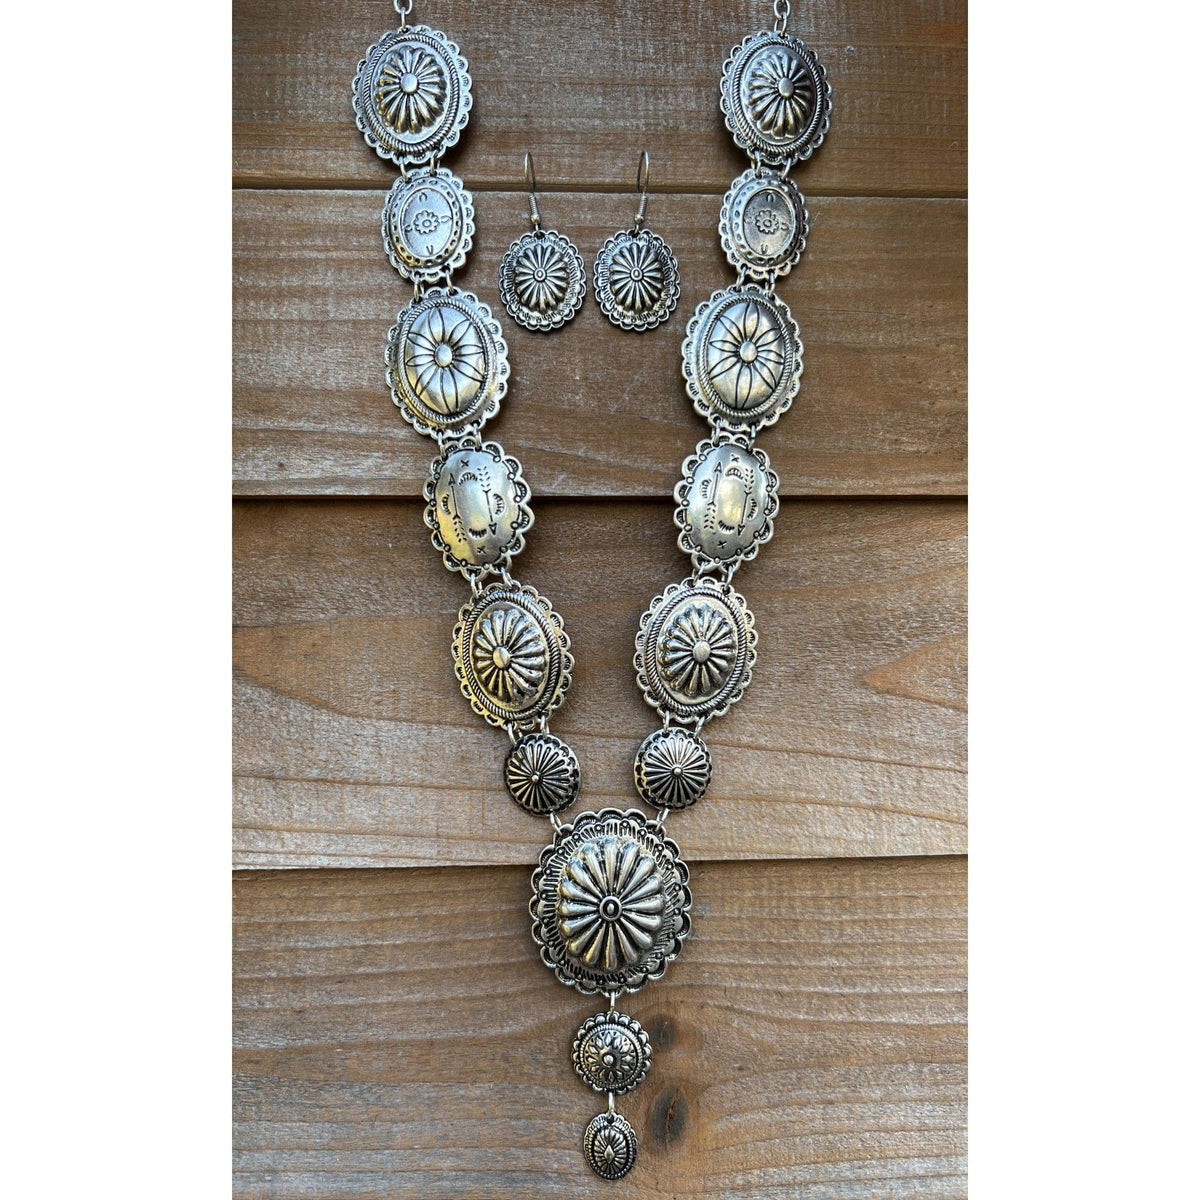 Vintage Style Concho Necklace Western Necklaces TheFringeCultureCollective